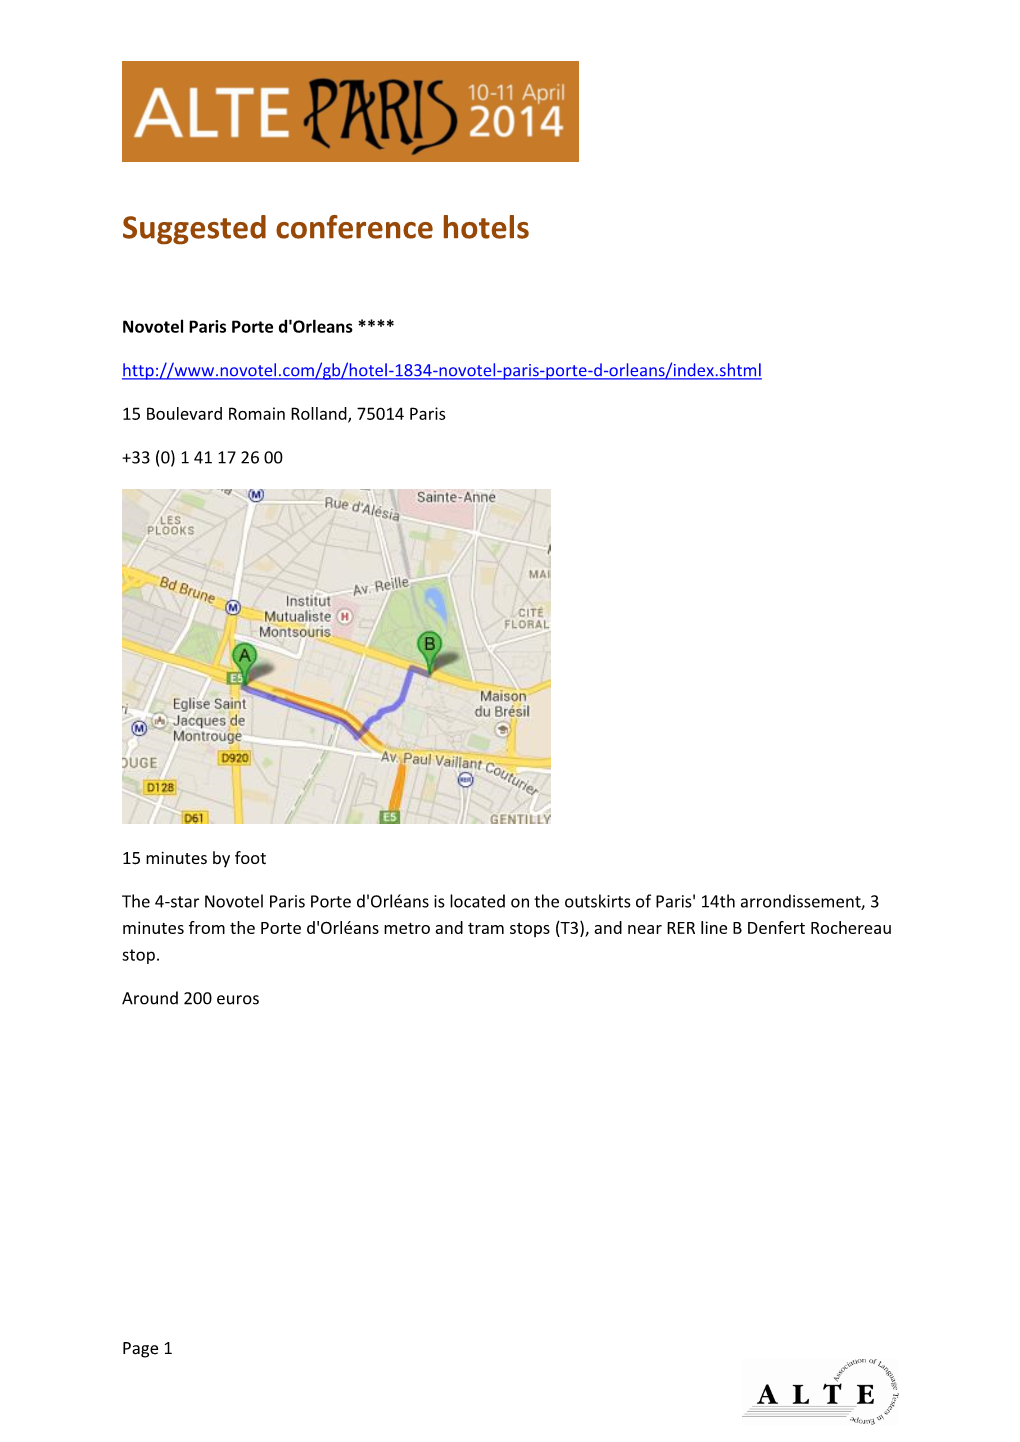 Suggested Conference Hotels